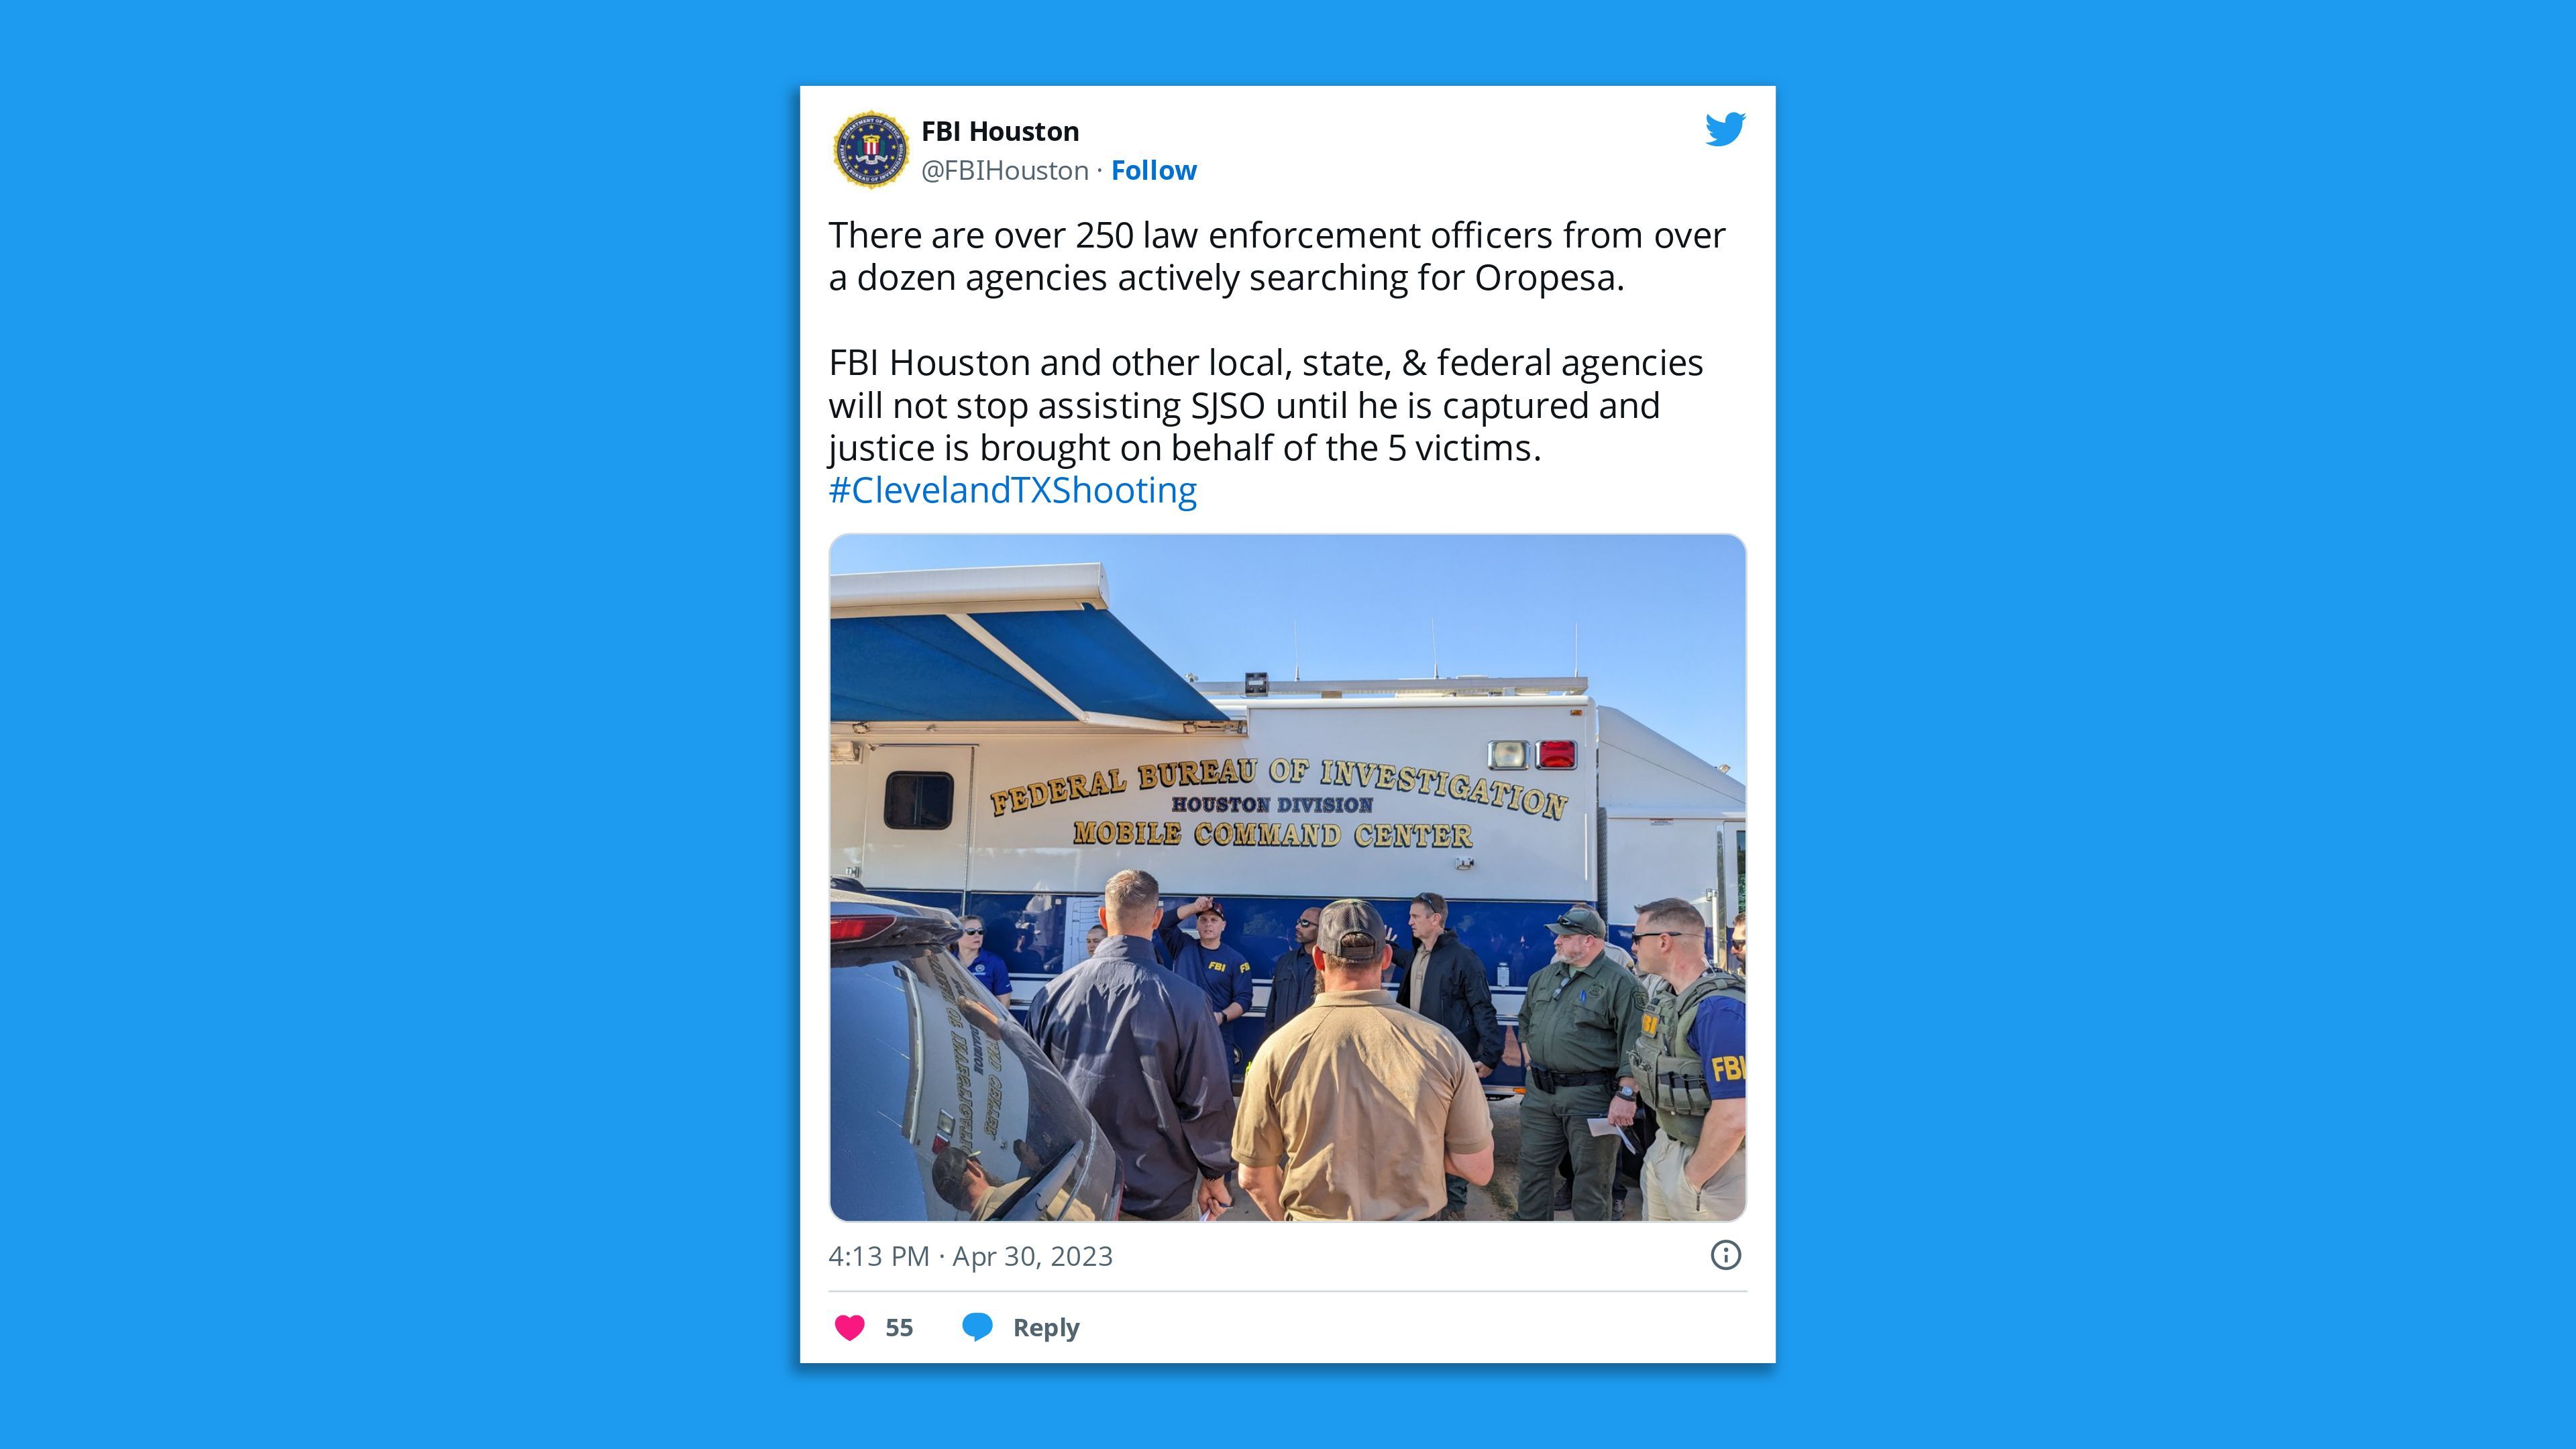 A screenshot of an FBI tweet stating, "There are over 250 law enforcement officers from over a dozen agencies actively searching for Oropesa.  FBI Houston and other local, state, & federal agencies will not stop assisting SJSO until he is captured and justice is brought on behalf of the 5 victims."